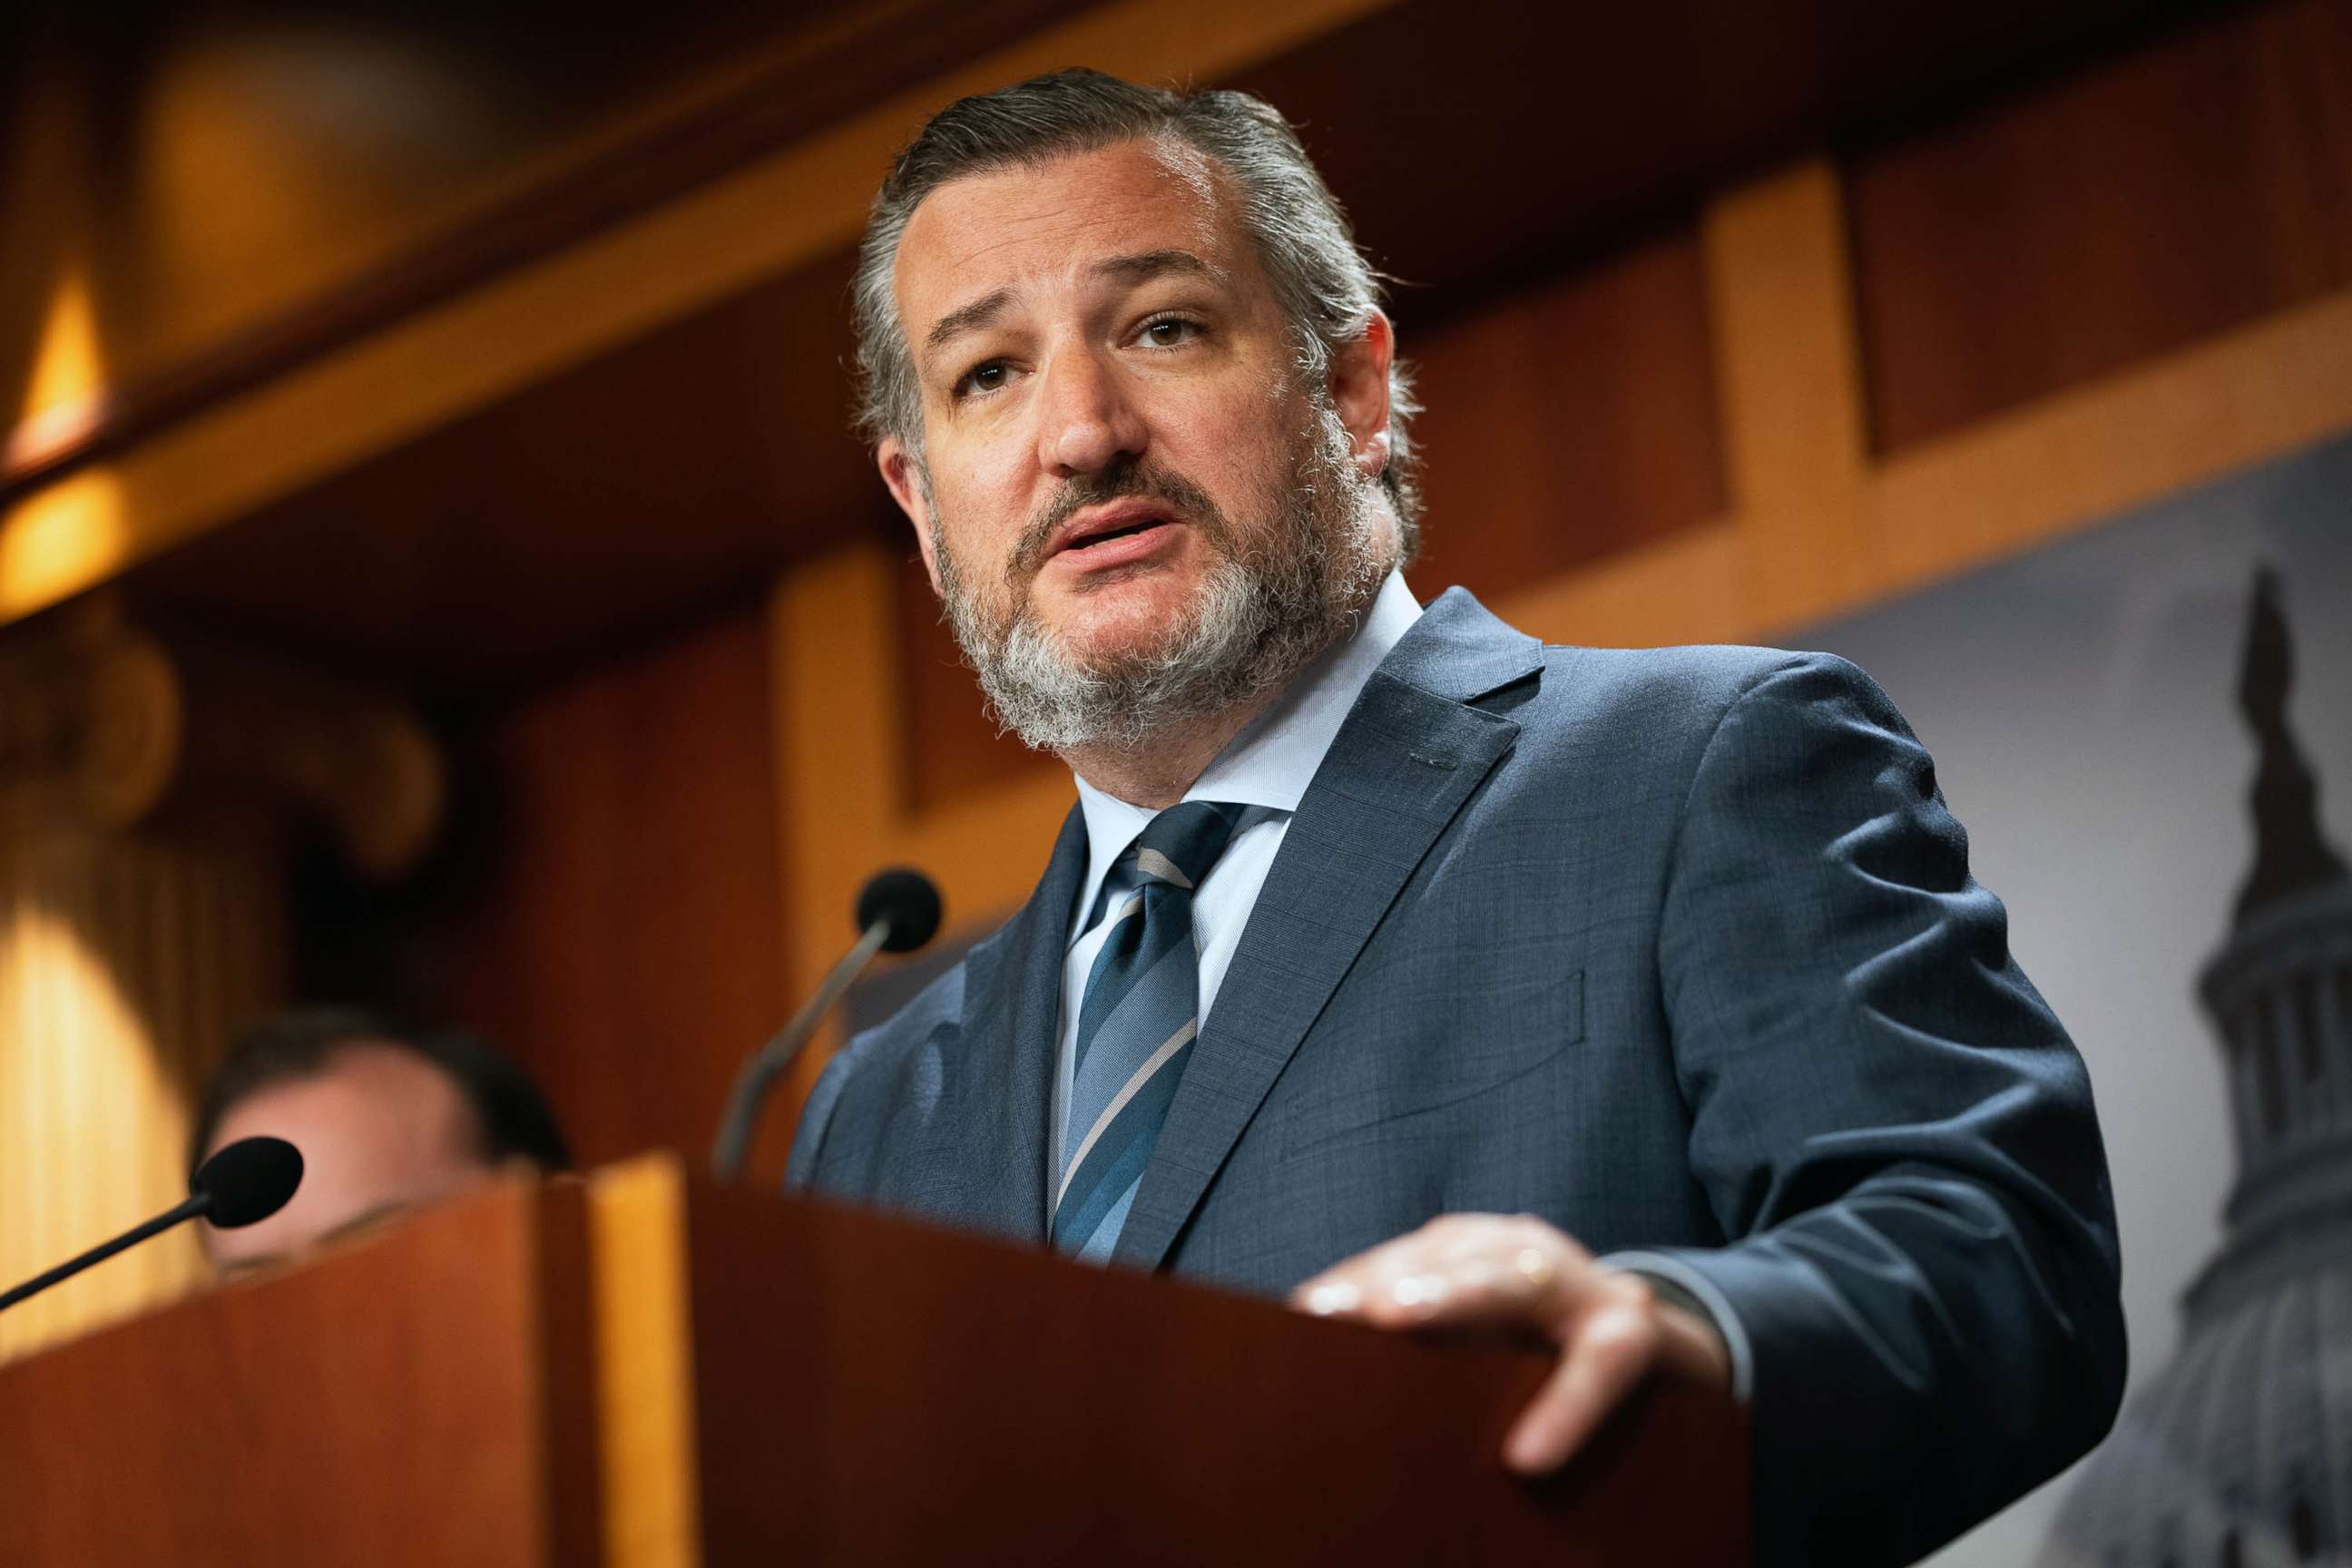 PHOTO: Sen. Ted Cruz speaks at a news conference in Washington on April 7, 2022.